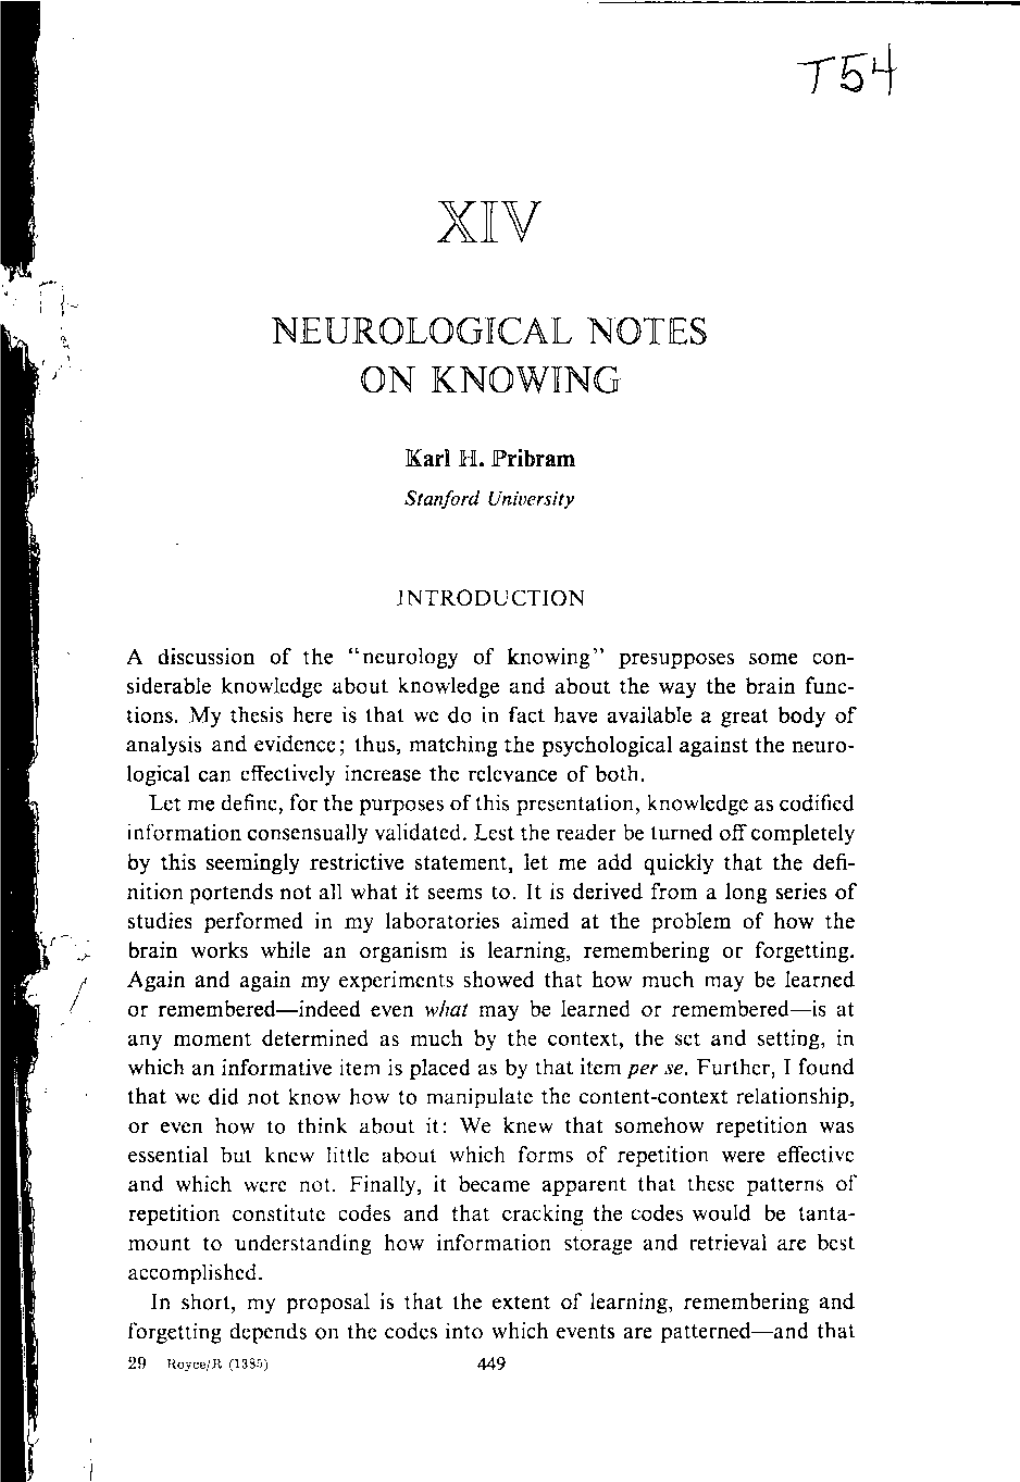 Neurological Notes on Knowing 451